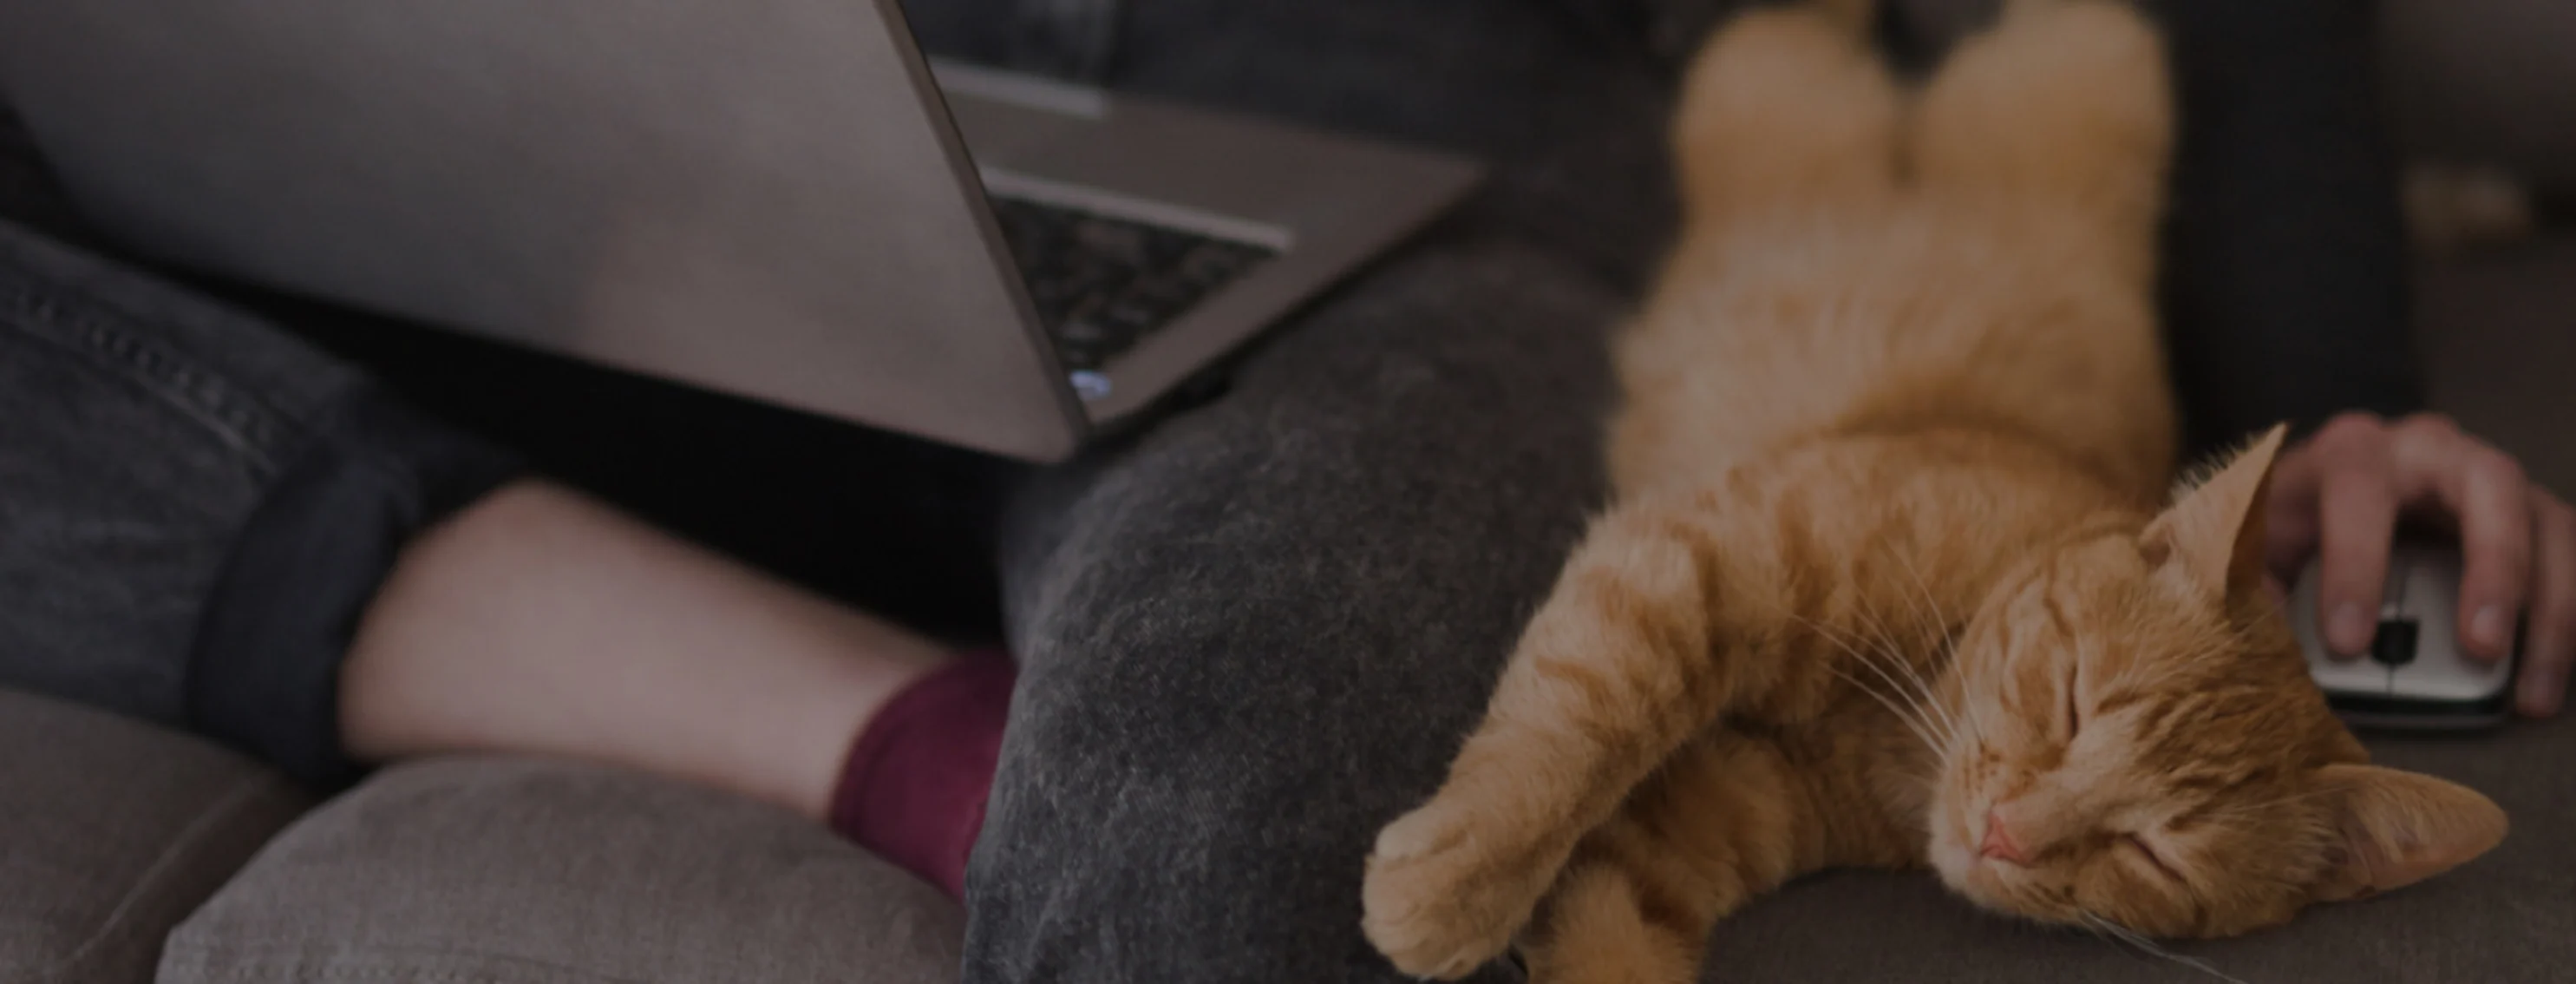 Orange cat laying next to a person working on a laptop